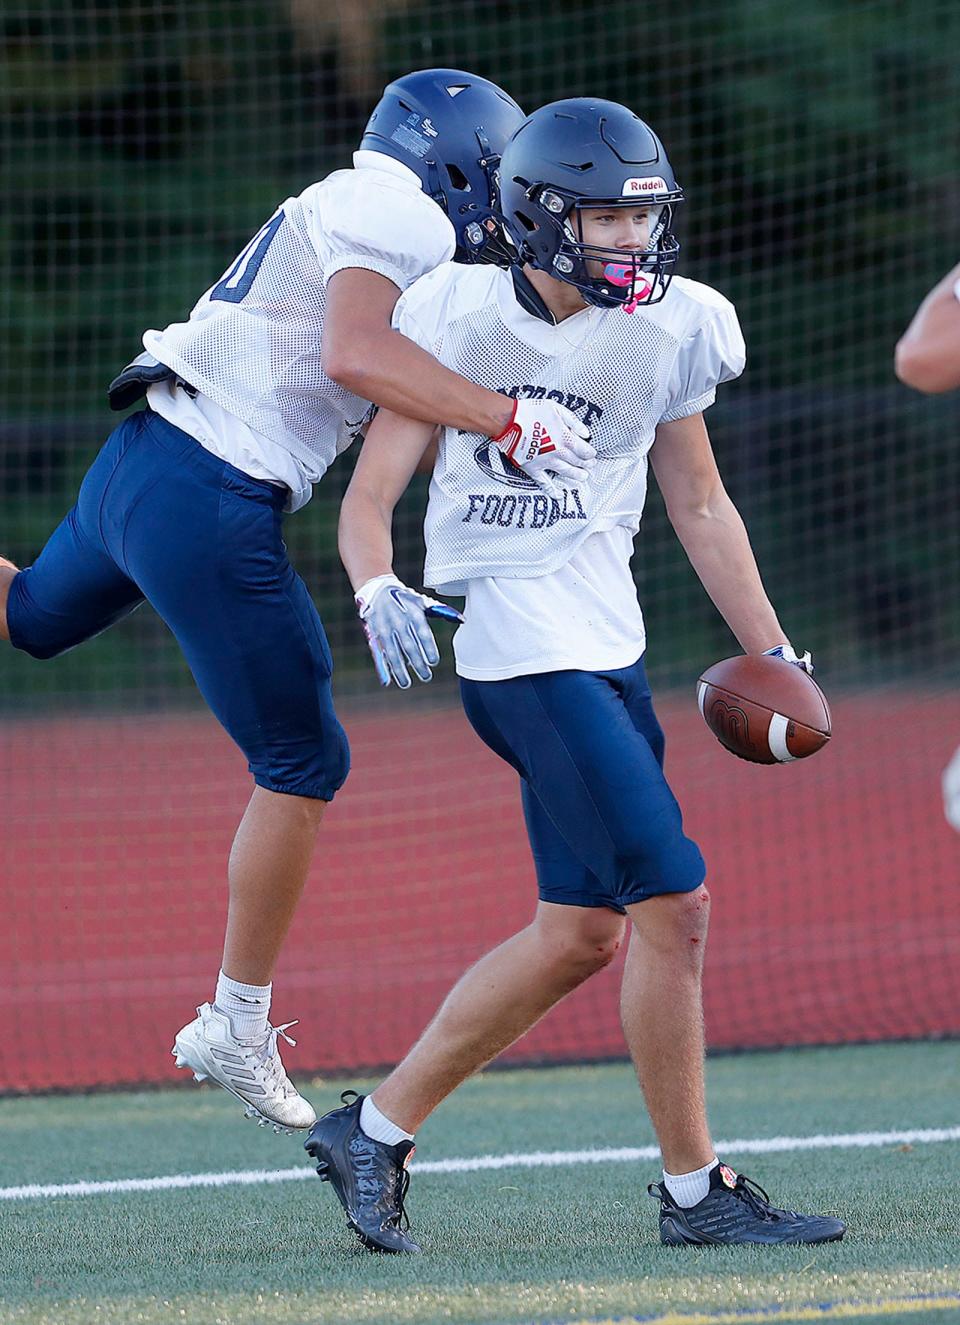 Pembroke Titan receiver Will McNamara scores a touchdown in a preseason football scrimmage at Norwell on Friday, Sept. 2, 2022.